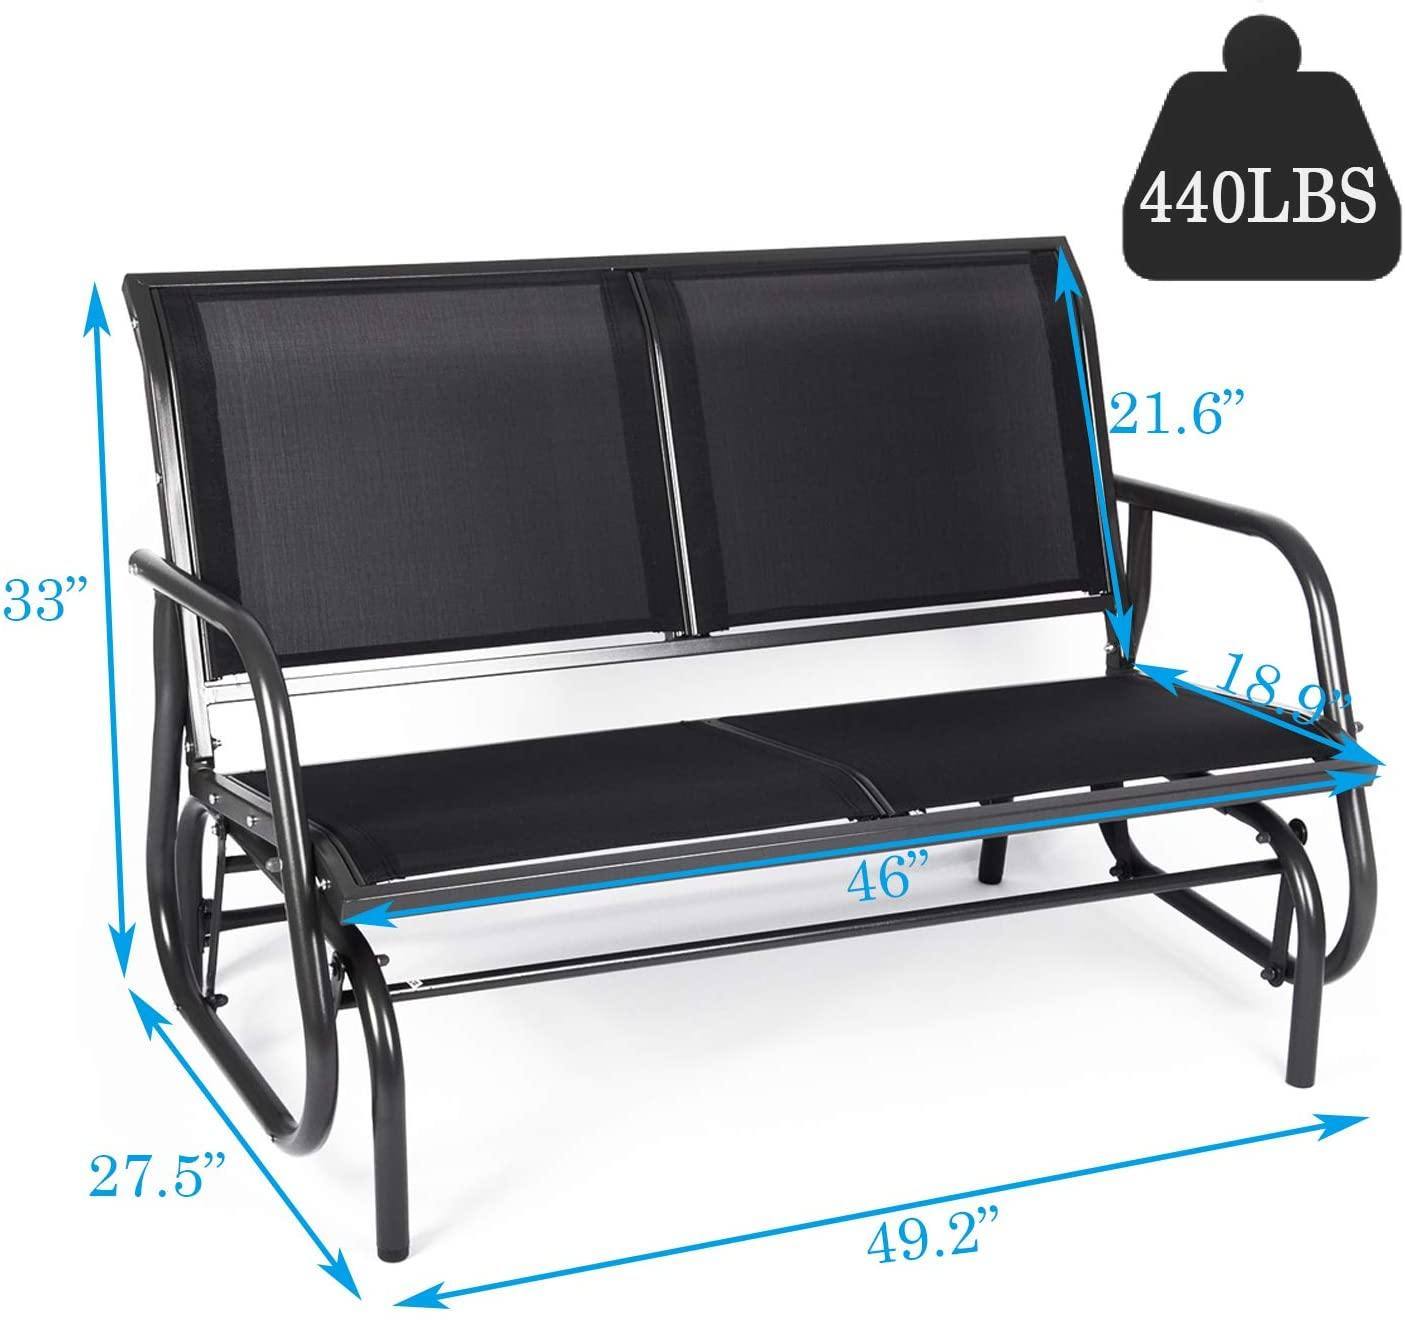 Bosonshop Outdoor Swing Glider Bench for 2 Persons Patio Rocking Chair